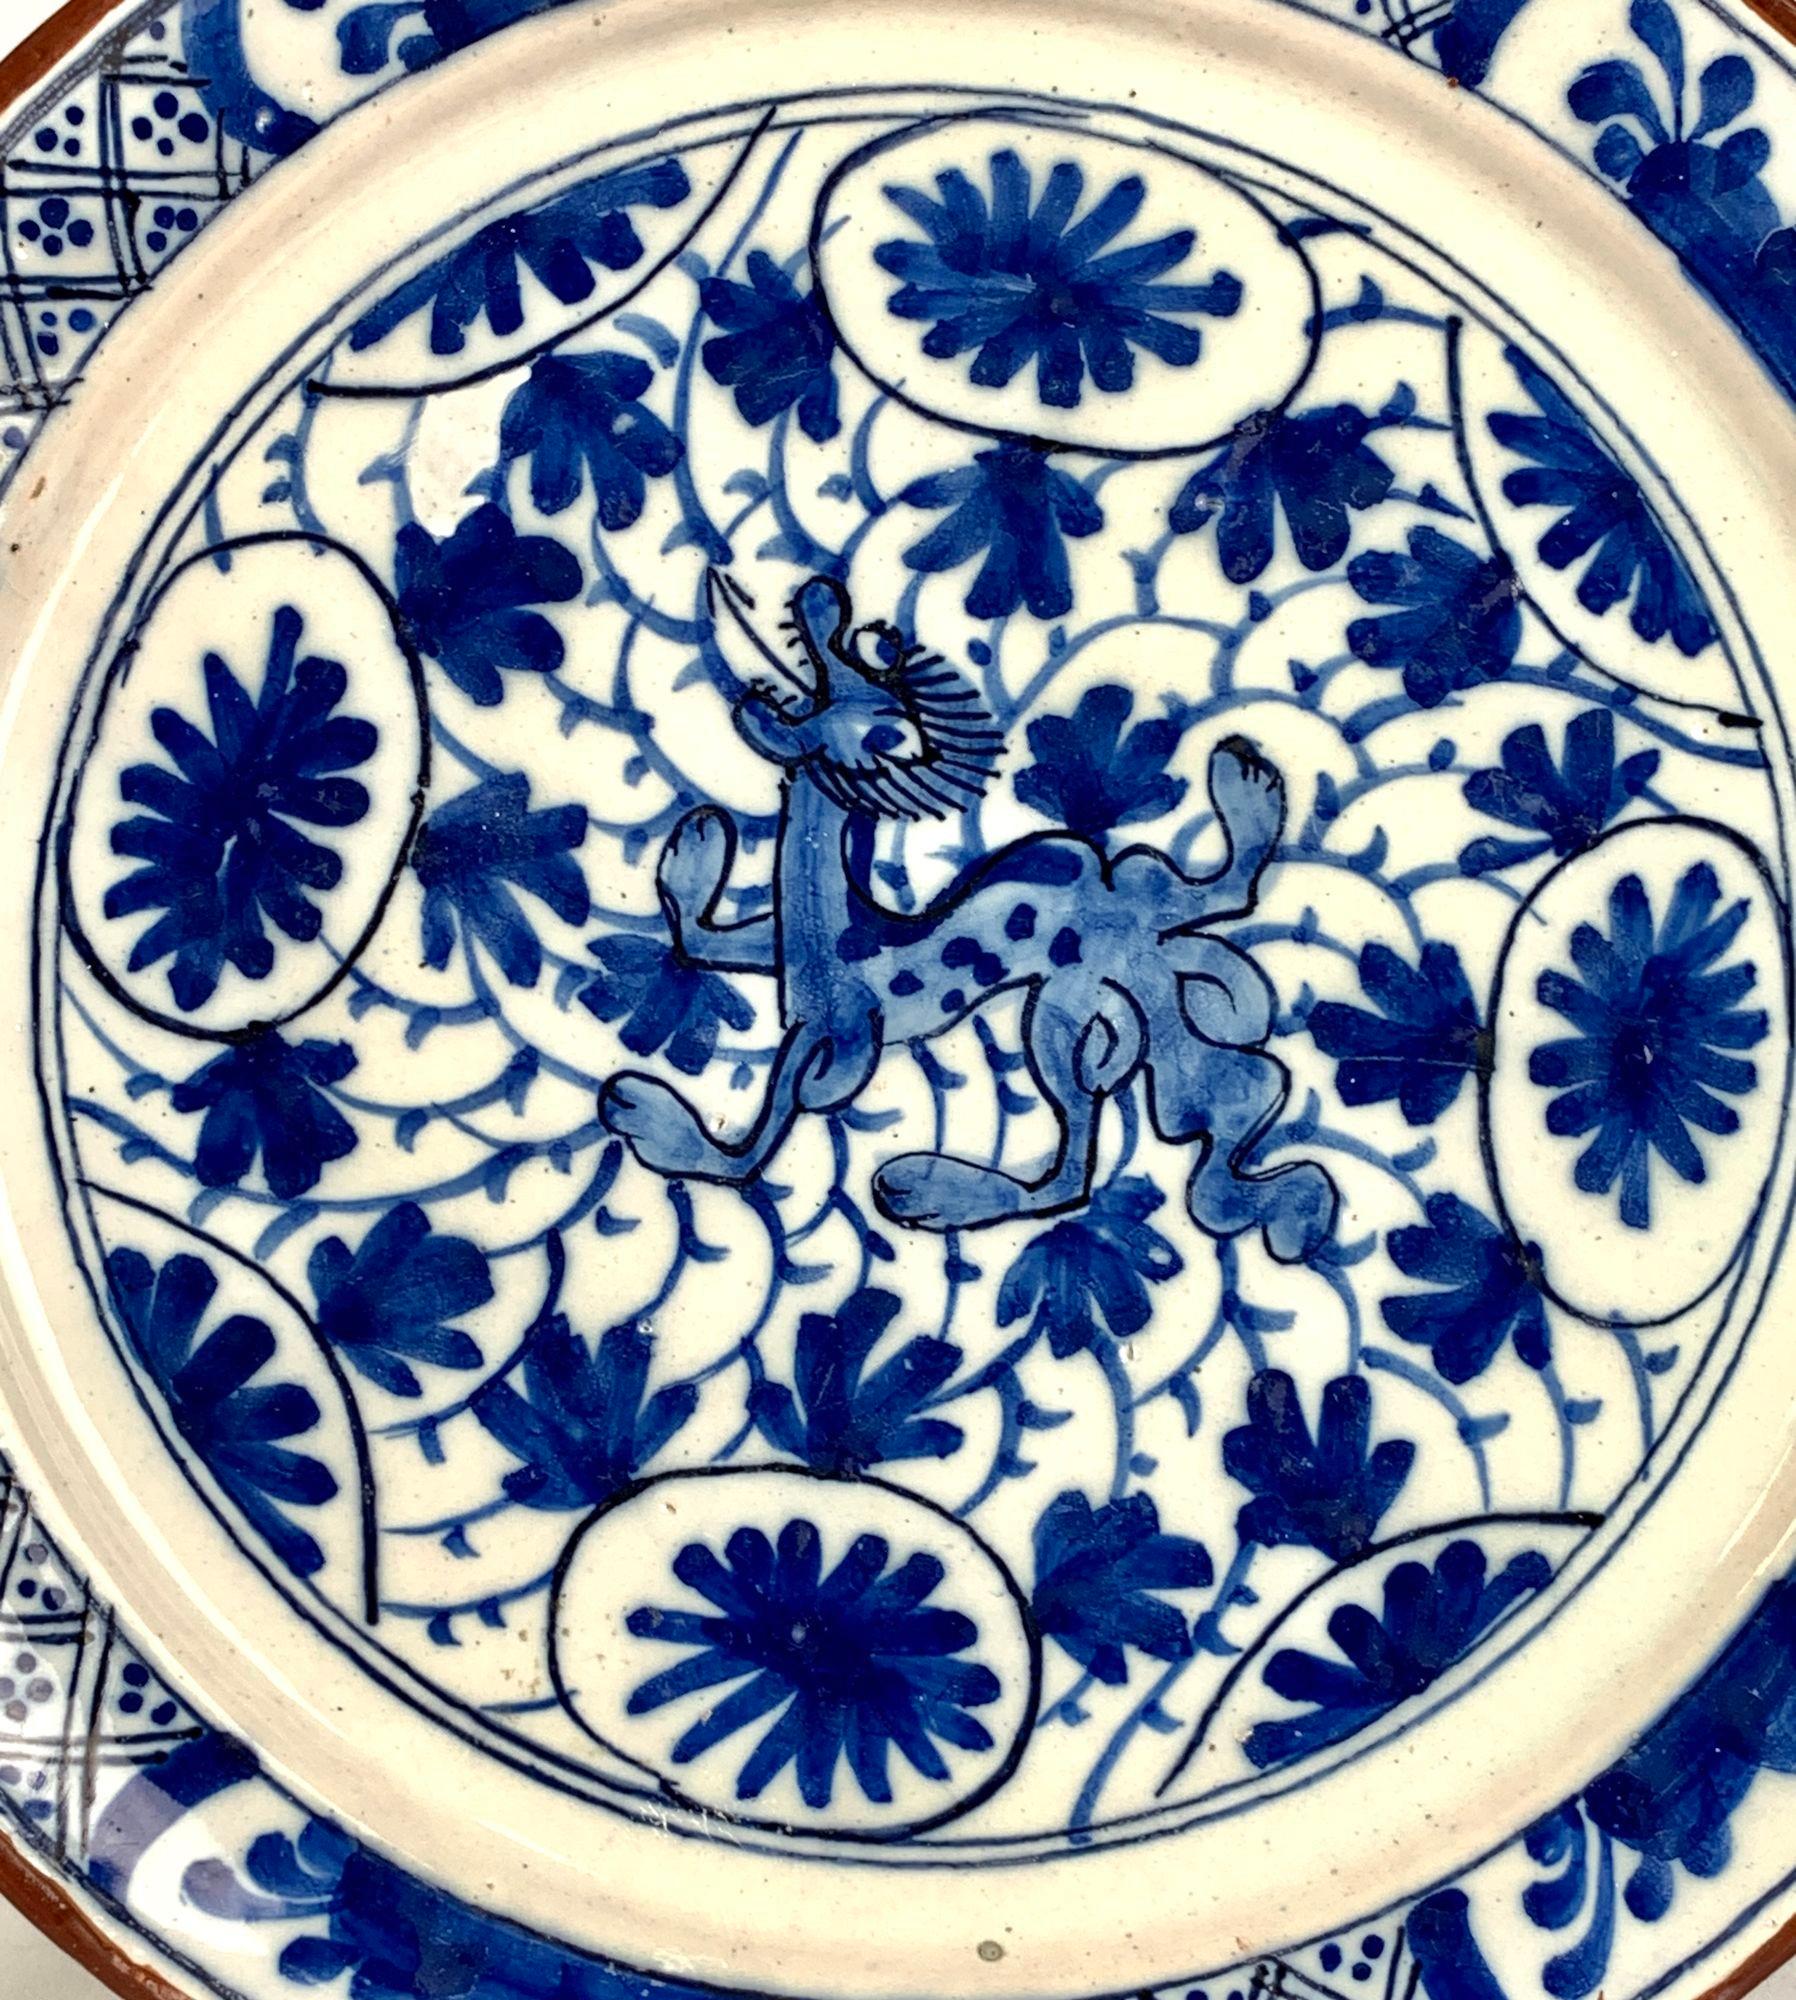 This exquisite dish is almost identical to a blue and white Delft dish in the Philadelphia Museum of Art Bequest collection of John W. Pepper. 1935-10-39.
The dish is described in detail by E B Scapp in her book 